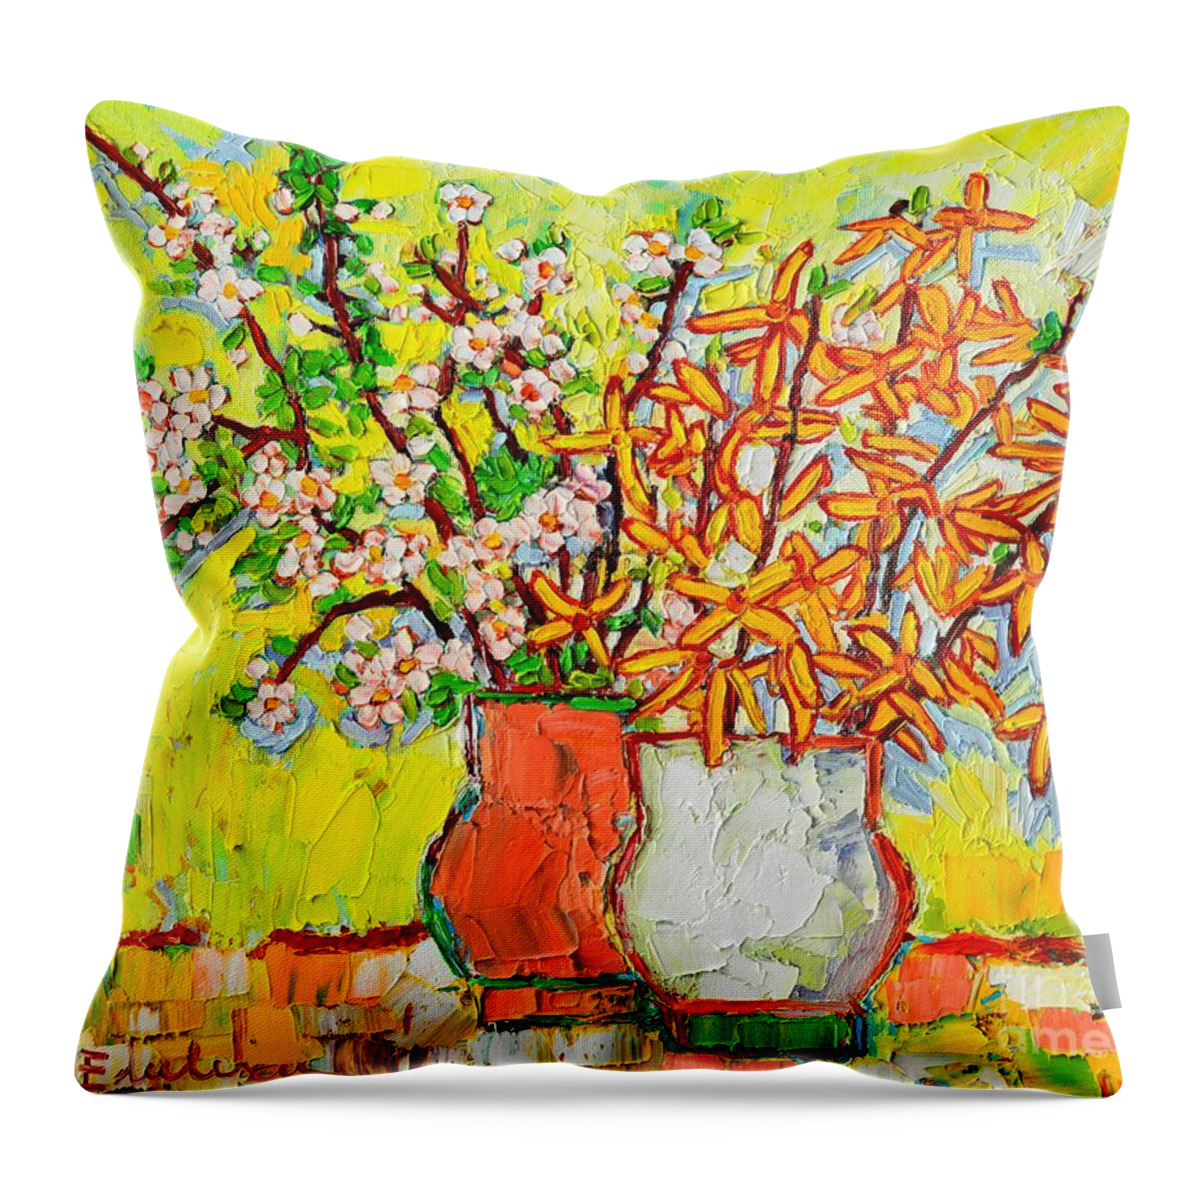 Spring Throw Pillow featuring the painting Forsythia And Cherry Blossoms Spring Flowers by Ana Maria Edulescu